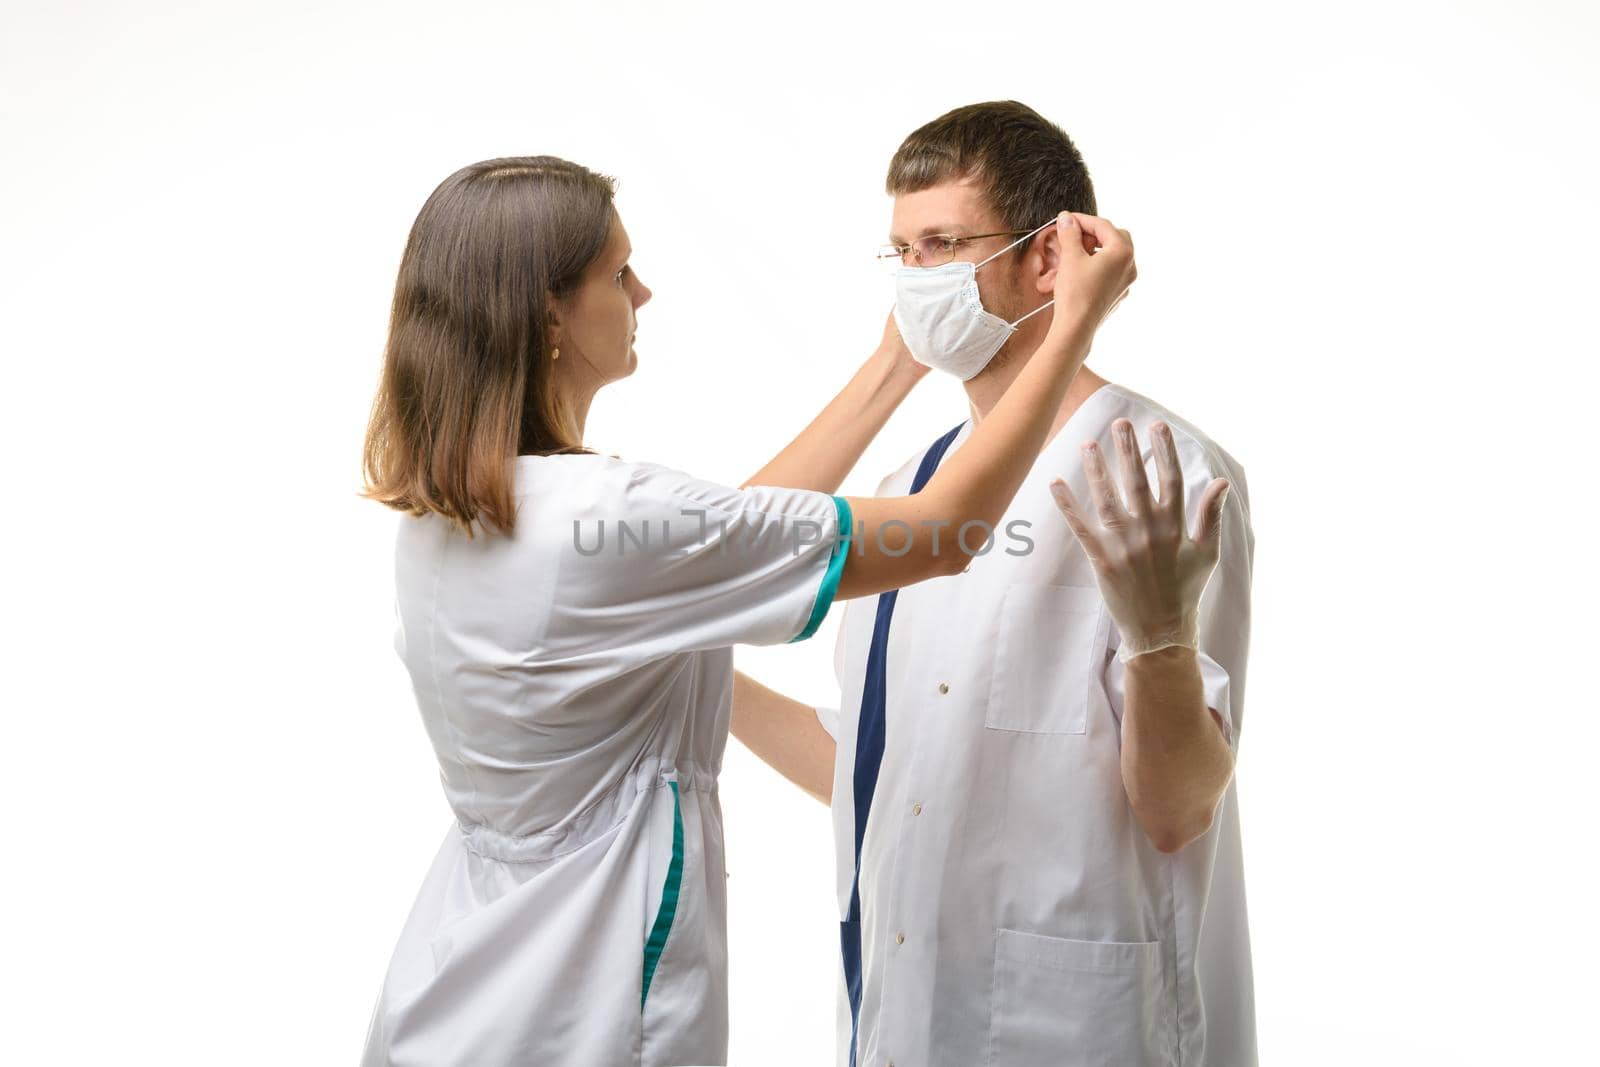 The nurse puts a medical mask on the doctor's face